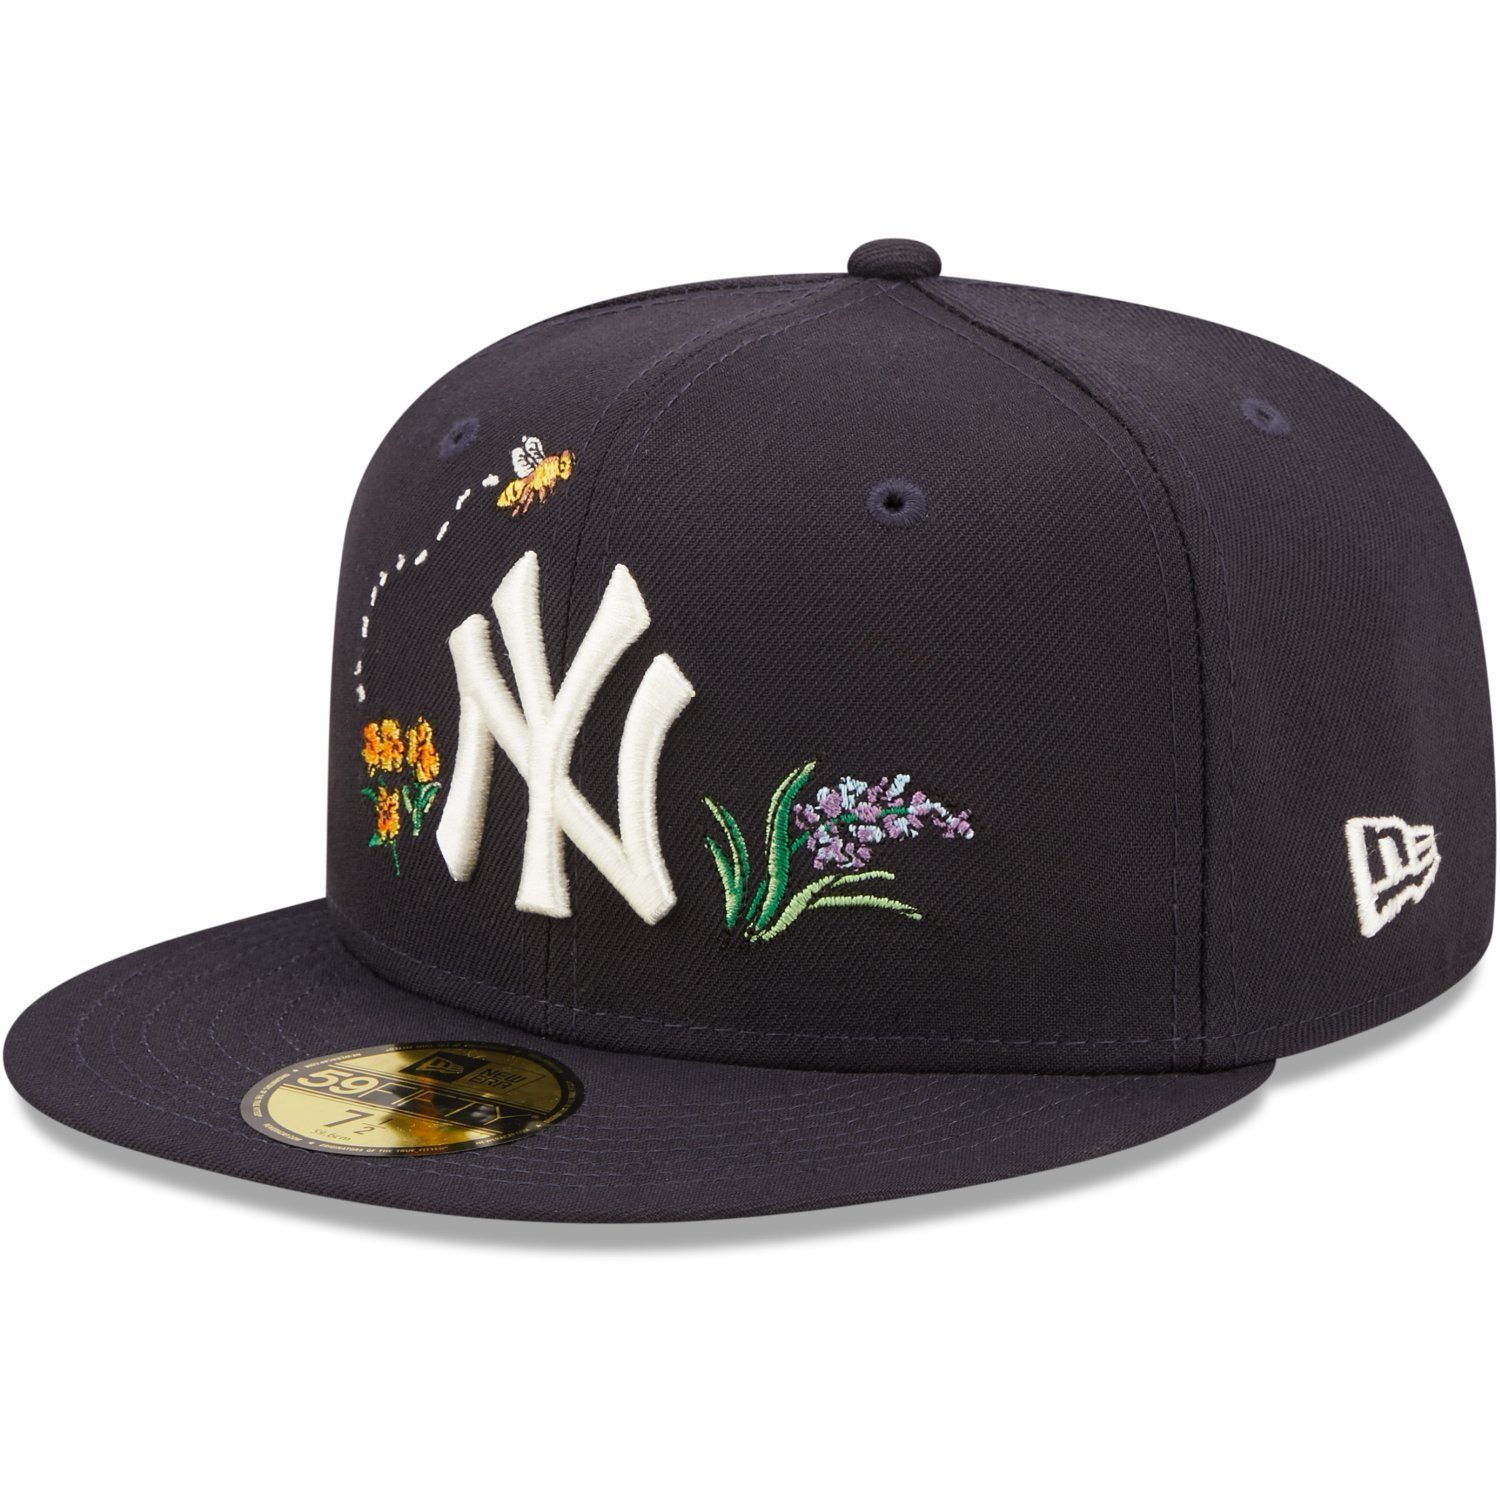 Cap Yankees WATER New New FLORAL 59Fifty Era Fitted York